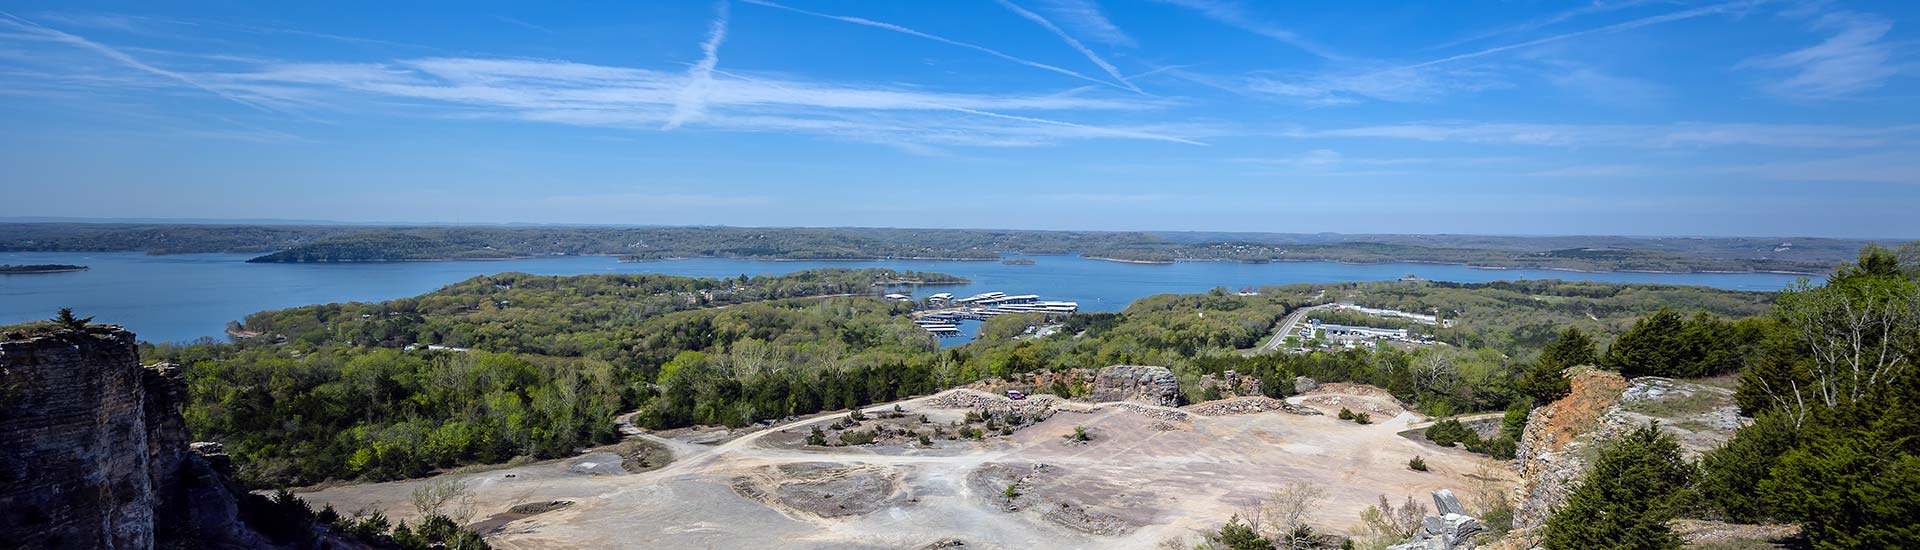 Blue sky view of Pink Jeep Tours Branson's Baird Mountain off-road course with Table Rock Lake in the background.